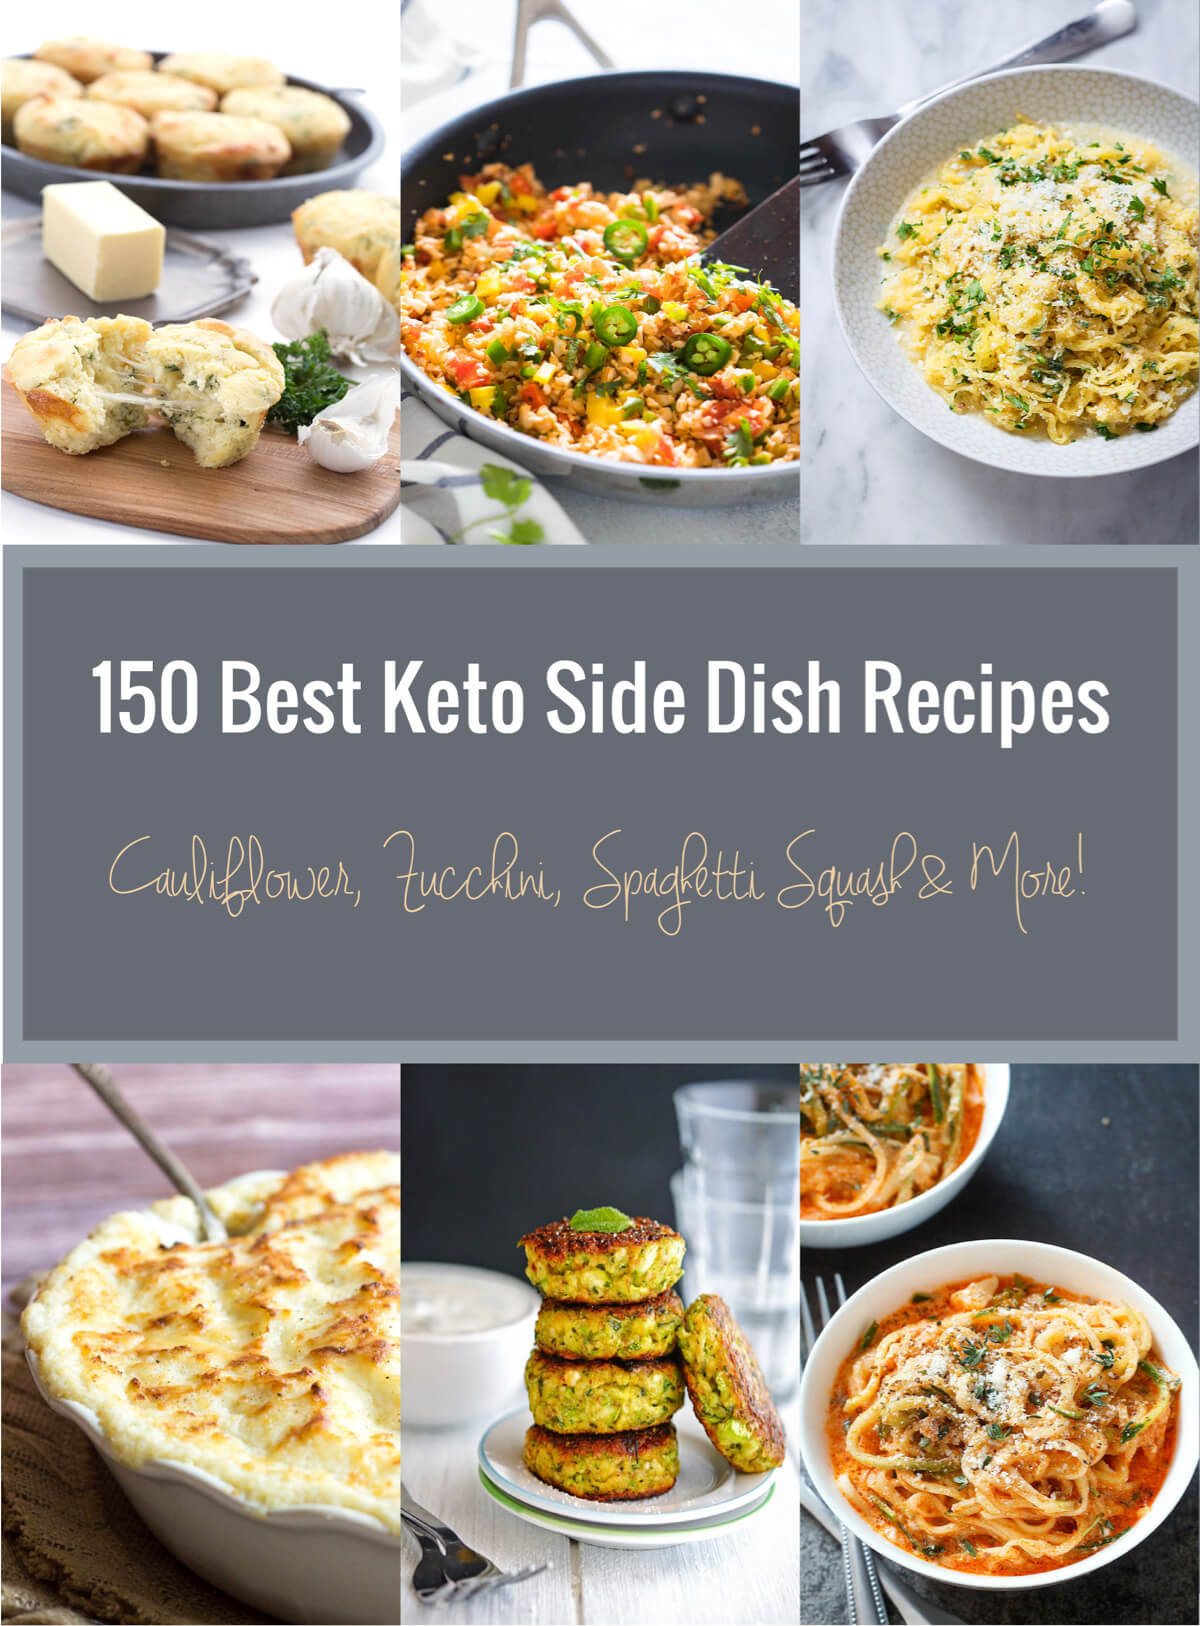 Low Carb Keto Sides
 150 Best Keto Side Dish Recipes Low Carb